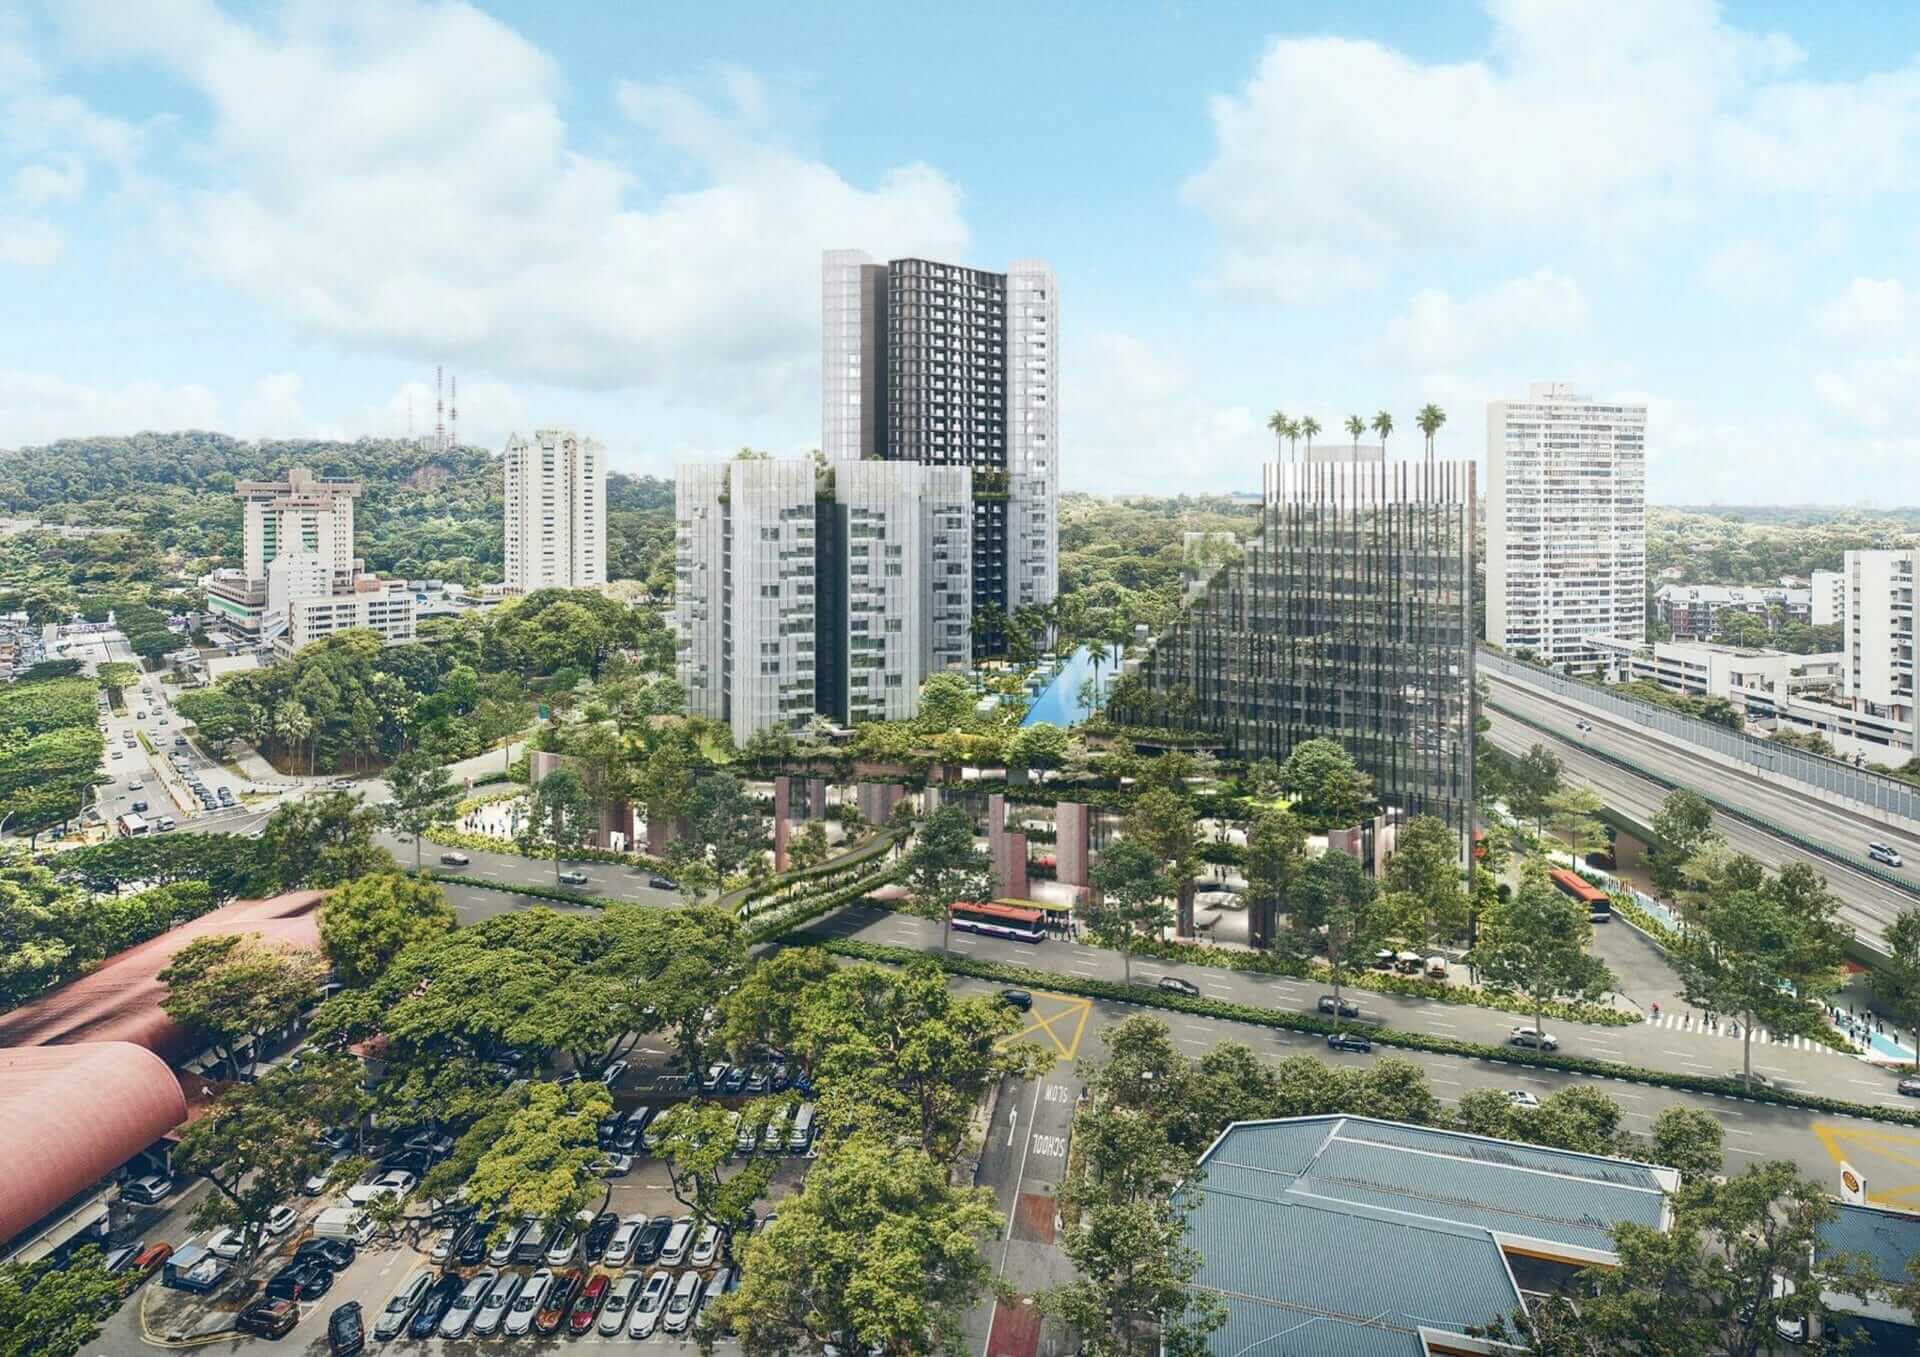 The Reserve Residences at Upper Bukit Timah transformation